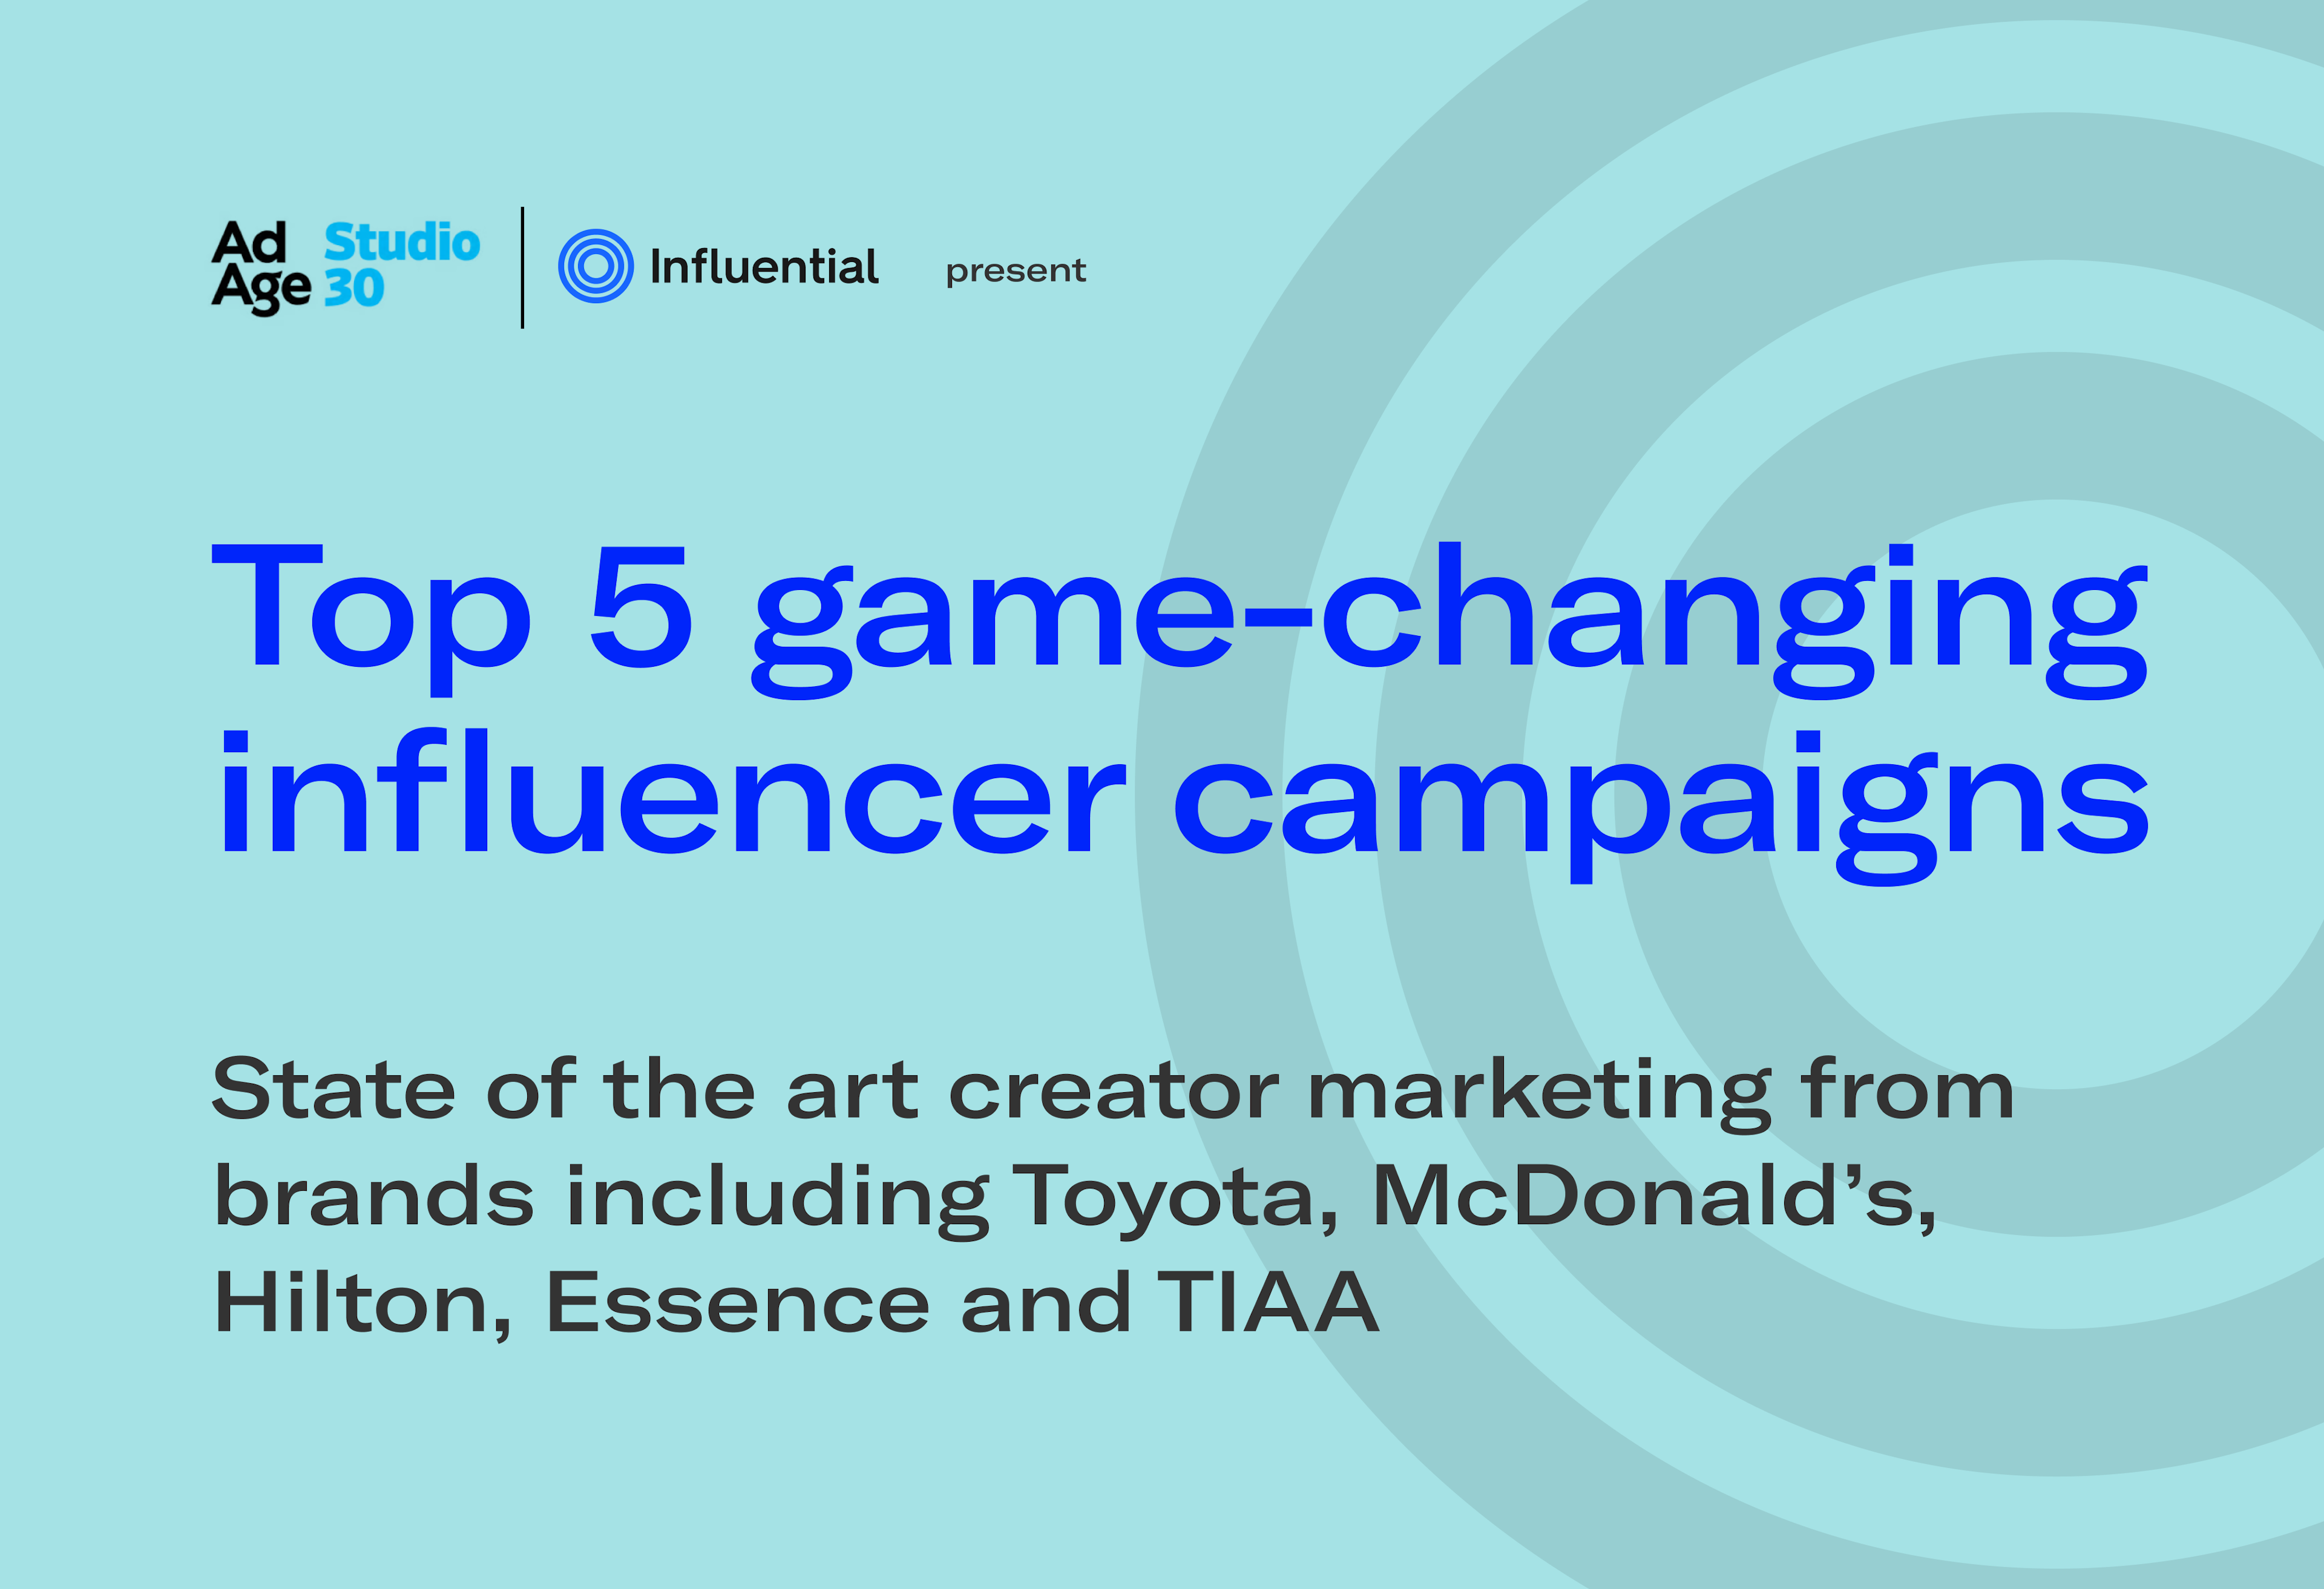 Top 5 Game-Changing Influencer Campaigns